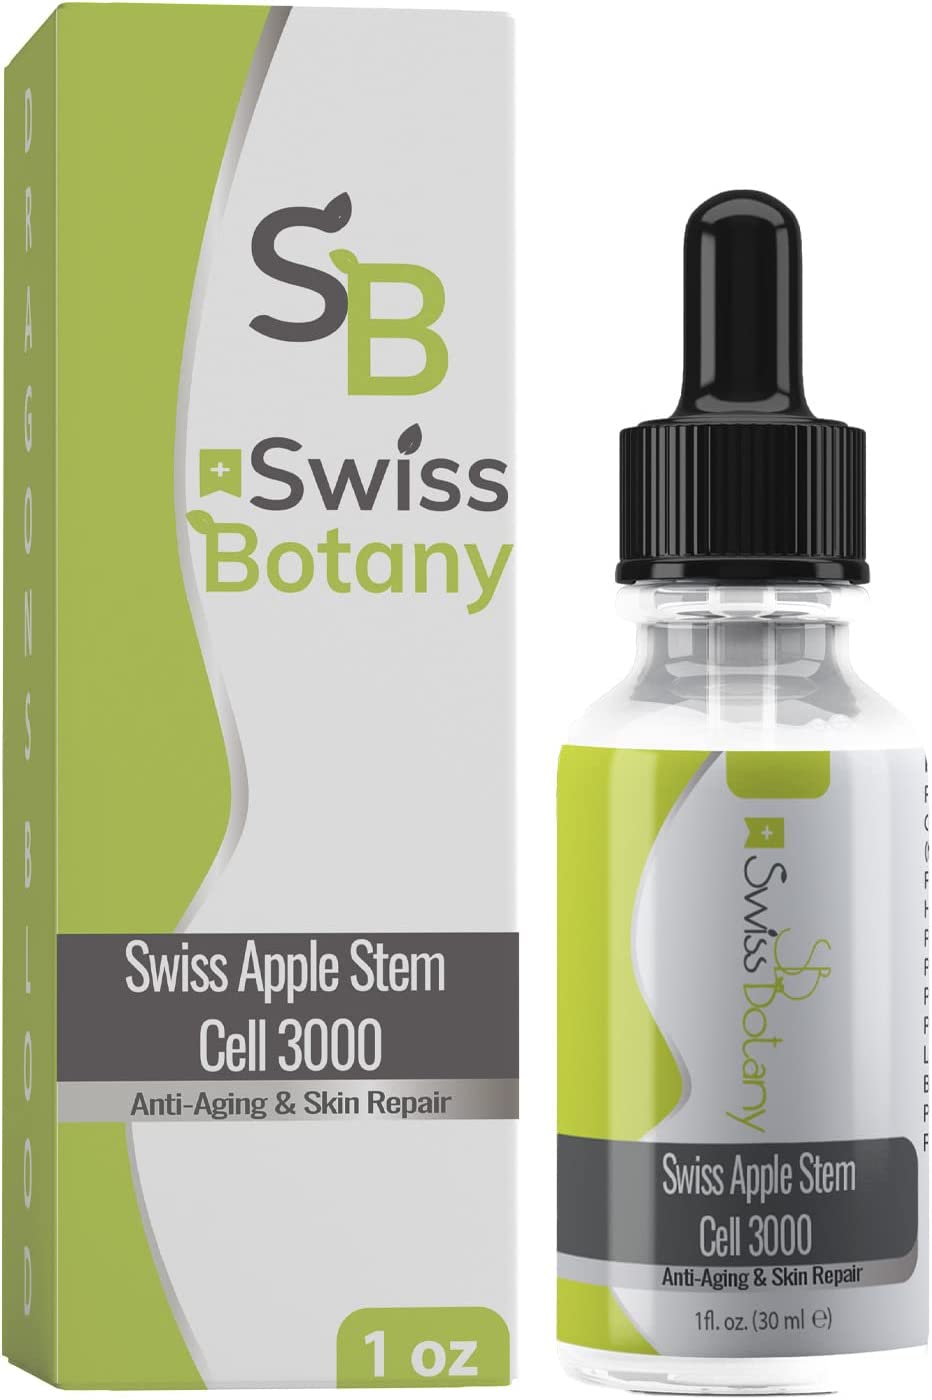 Swiss Botany Health and Beauty 1 Fl Oz (Pack of 1) Swiss Apple Stem Cell 3000 Serum, Plant Stem Cells No Animal Products, Reduce Aging Signs Wrinkles + Discoloration, Restore Elasticity and Youthful Appearance | Premium Made by Swiss Botany, 1 fluid ounce, 1 Bottle